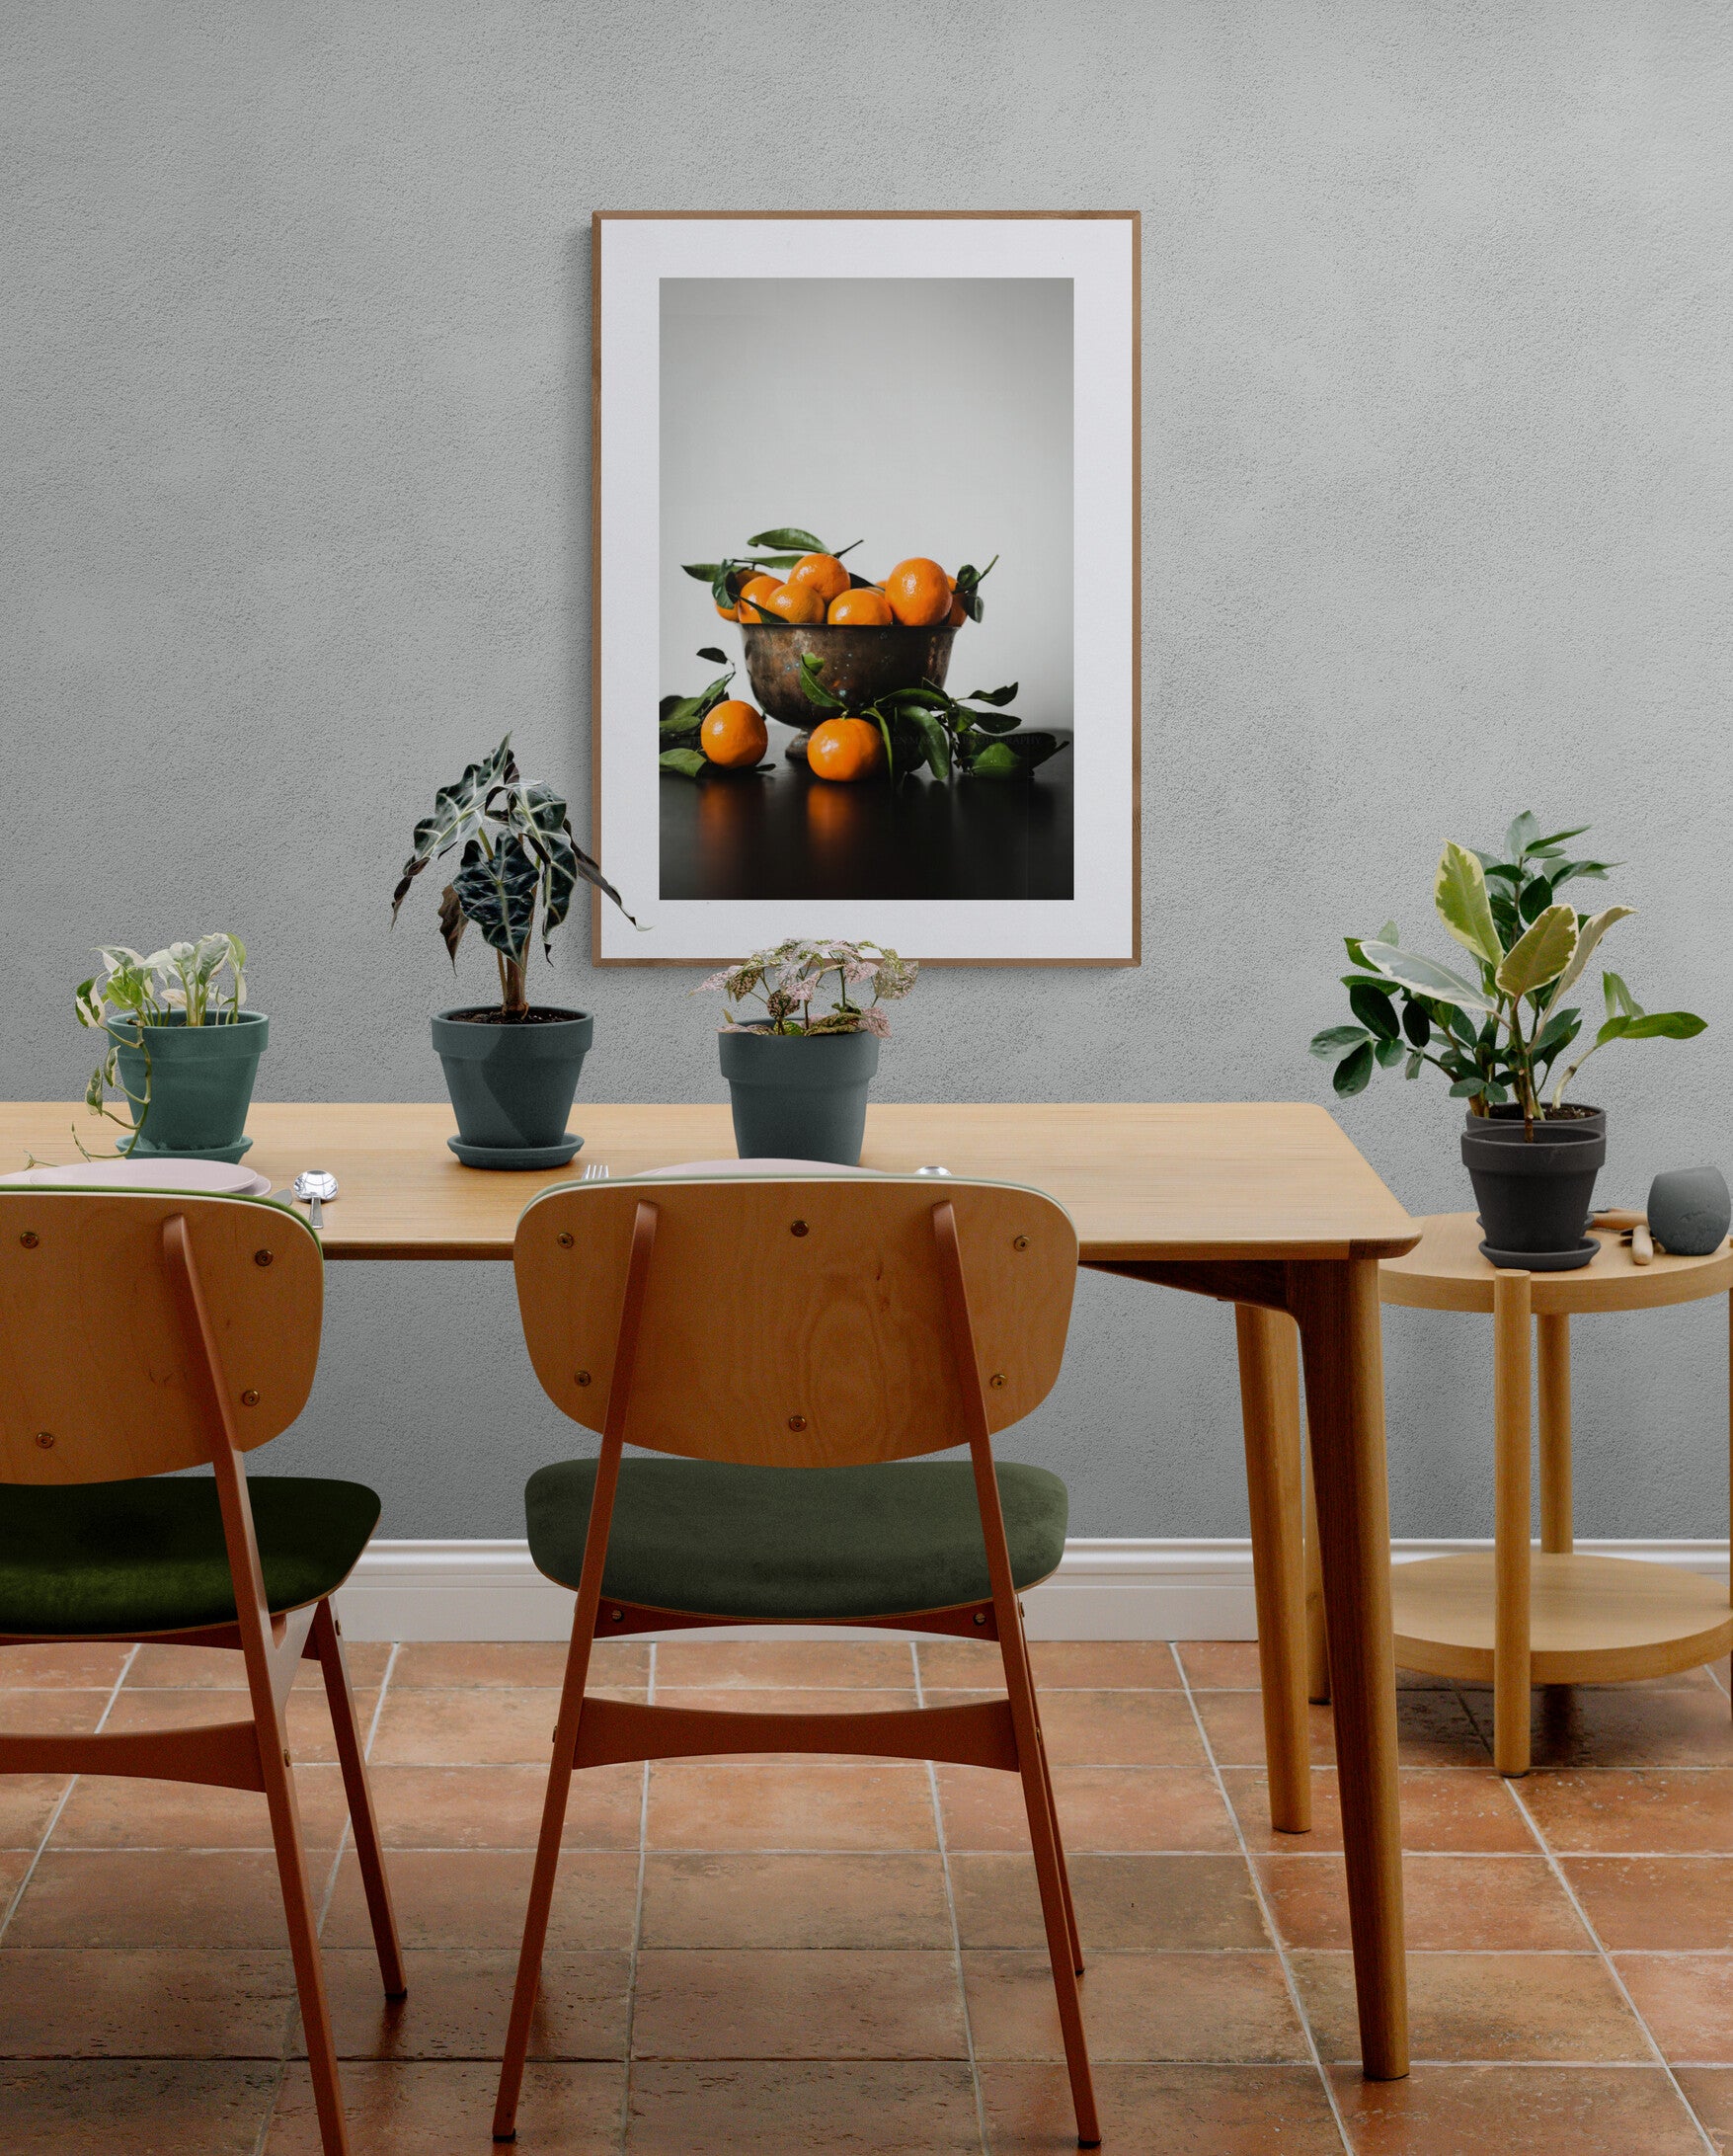 Photograph of Orange Citrus in a Bowl as wall art in a Dining Room